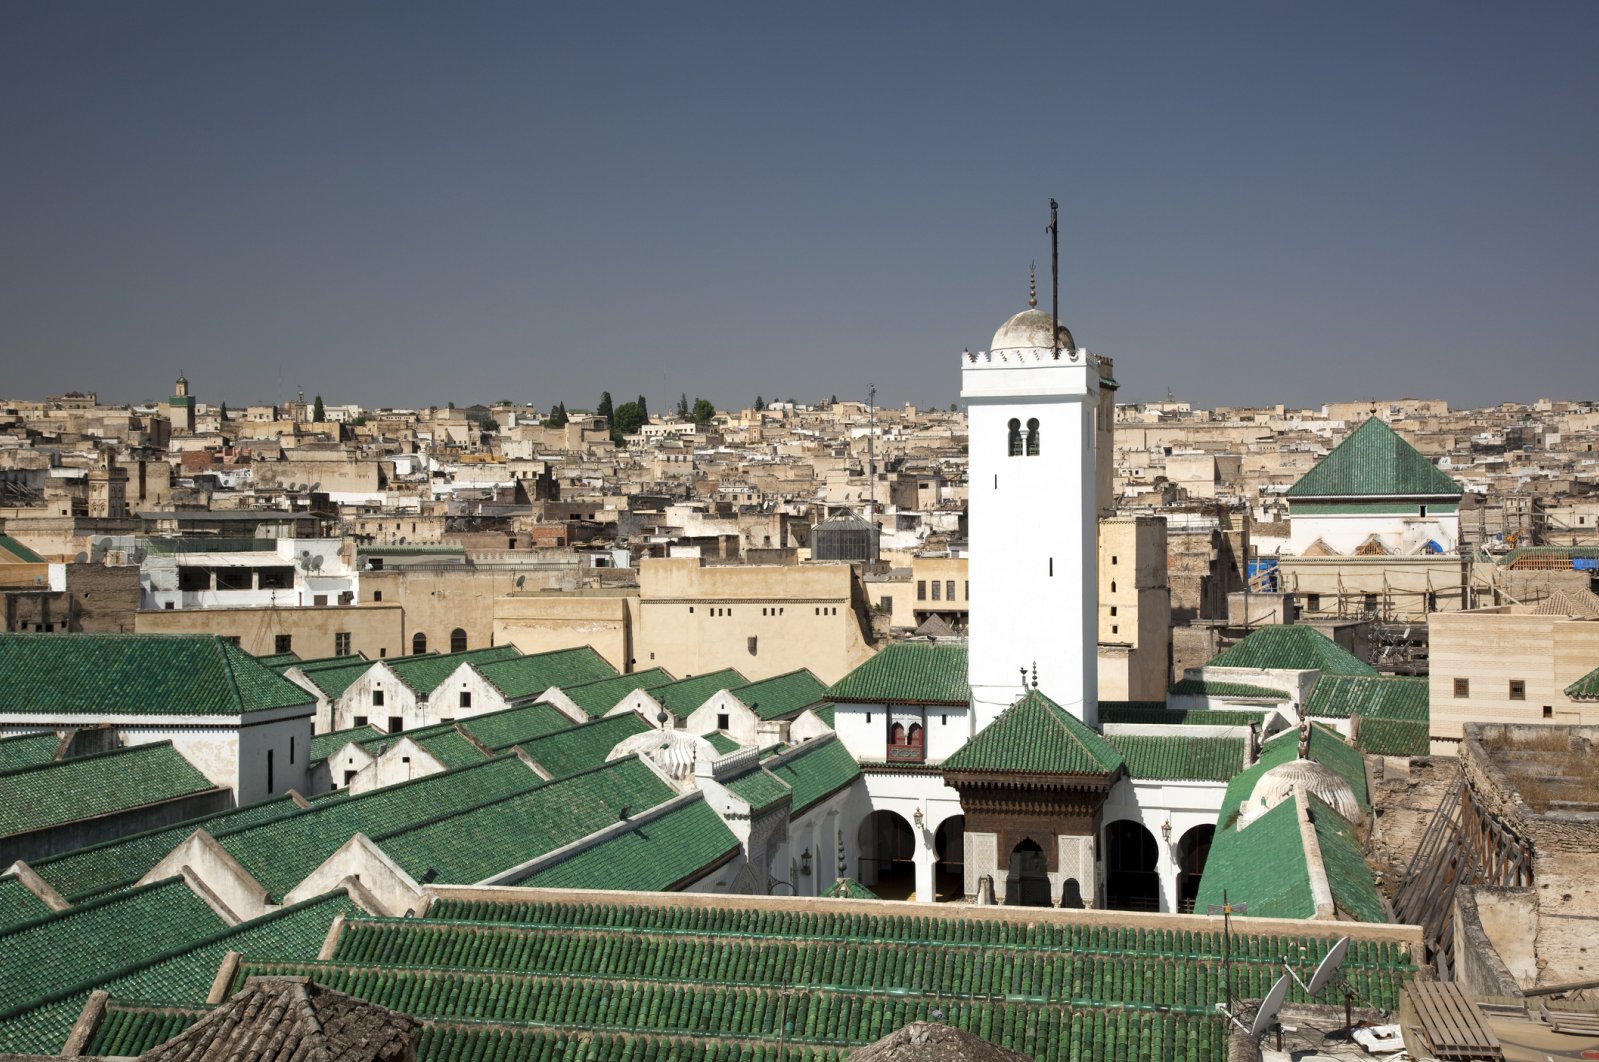 The University of al-Qarawiyyin is the first degree-awarding educational institution in the world. (iStock Photo)